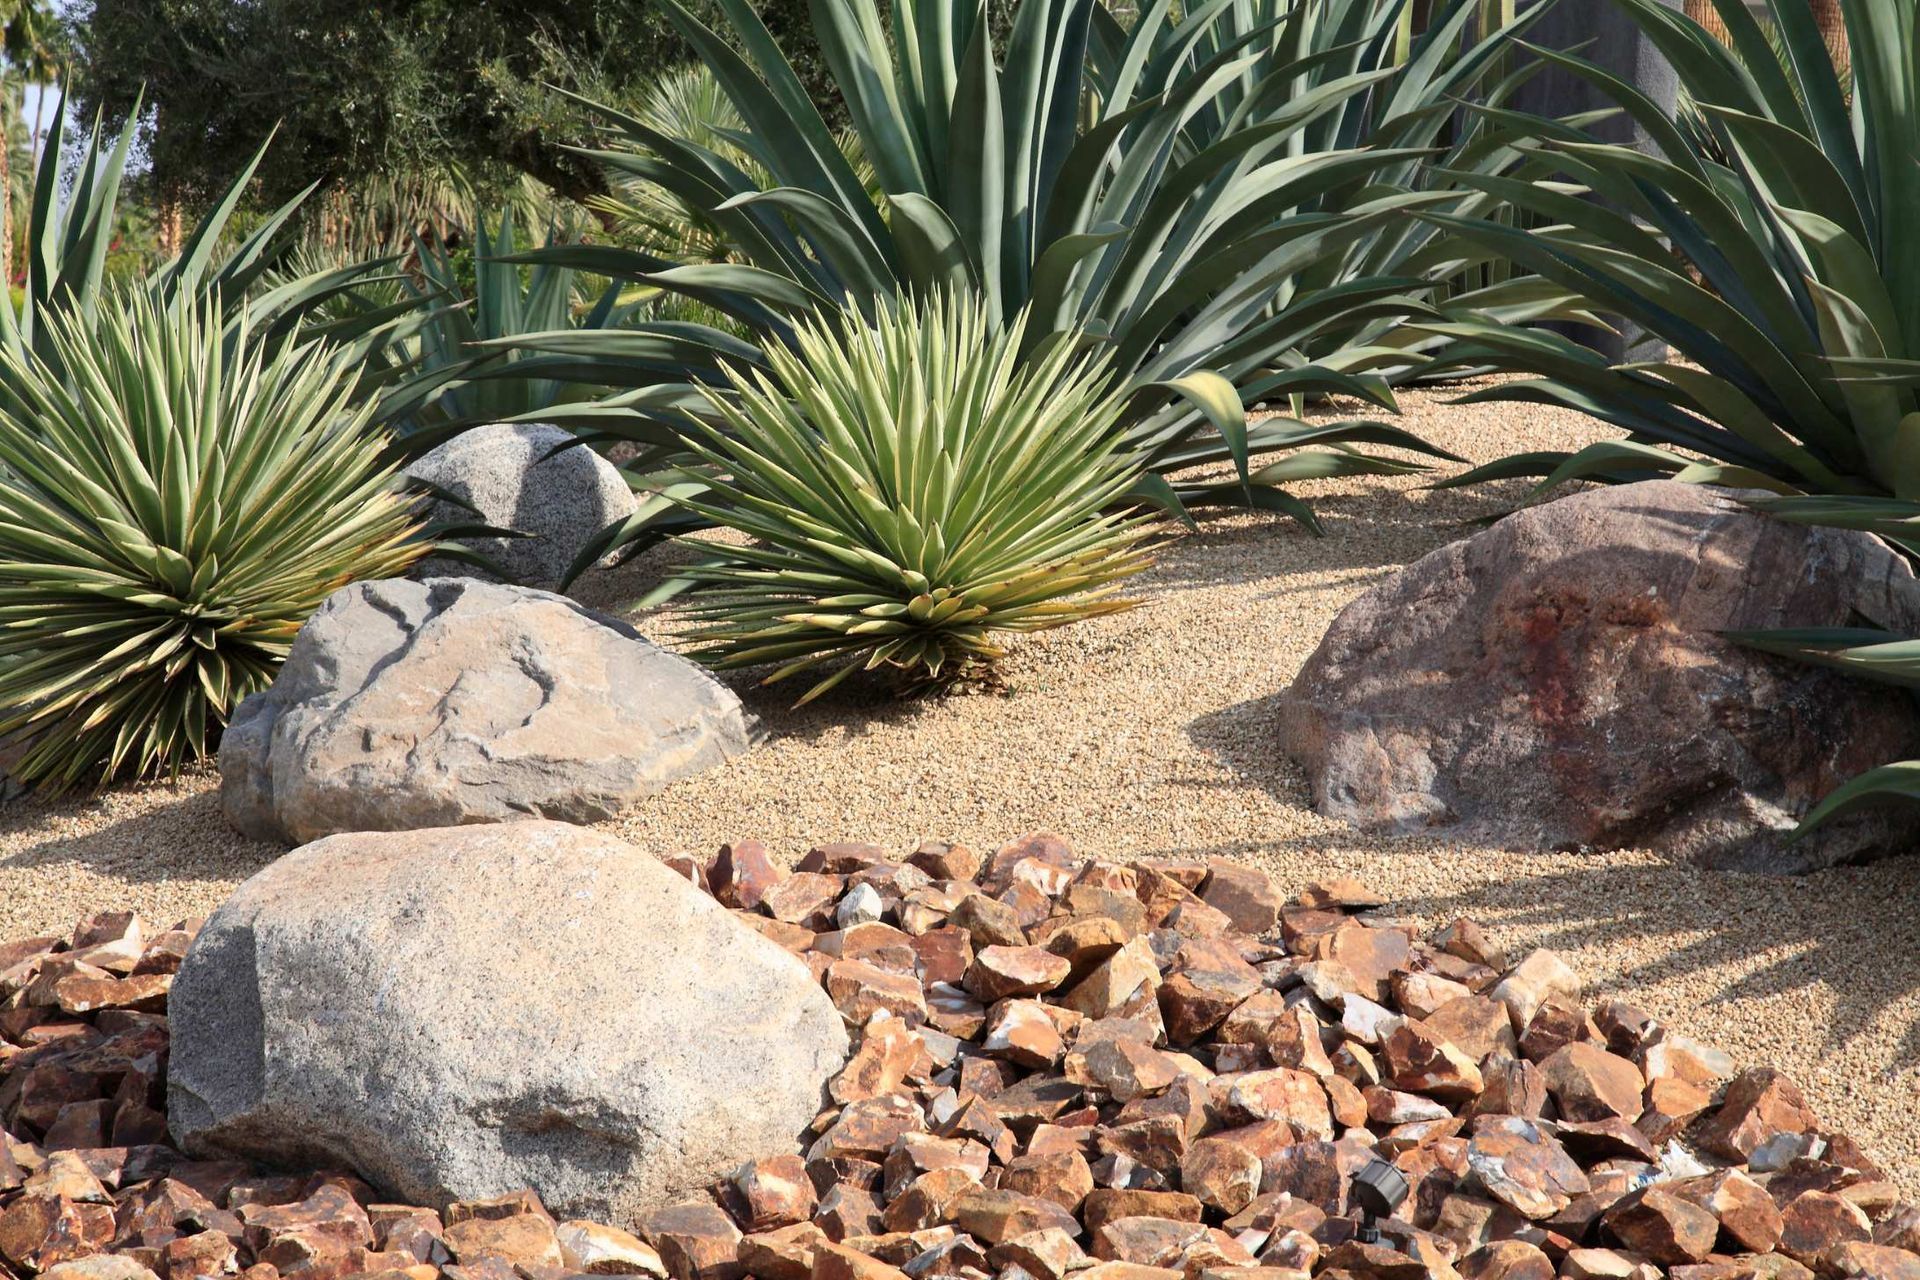 xeriscaping made out of rocks, succulents, and cacti